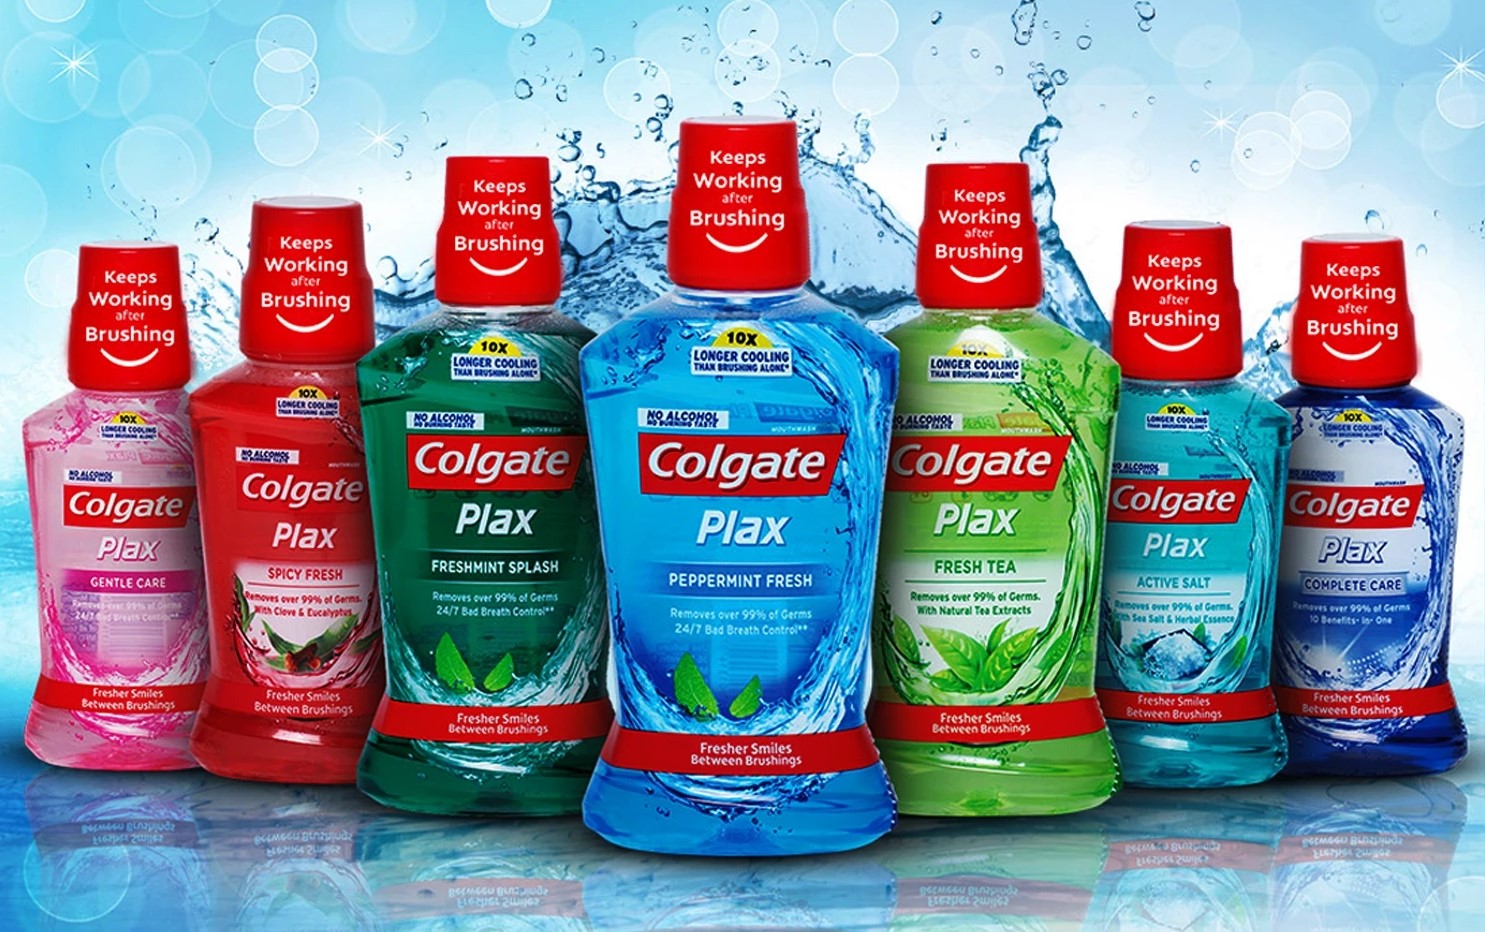 Up to 99.9%Germ protection with Colgate plax anti-bacterial Mouthwash (with Fresh mint)